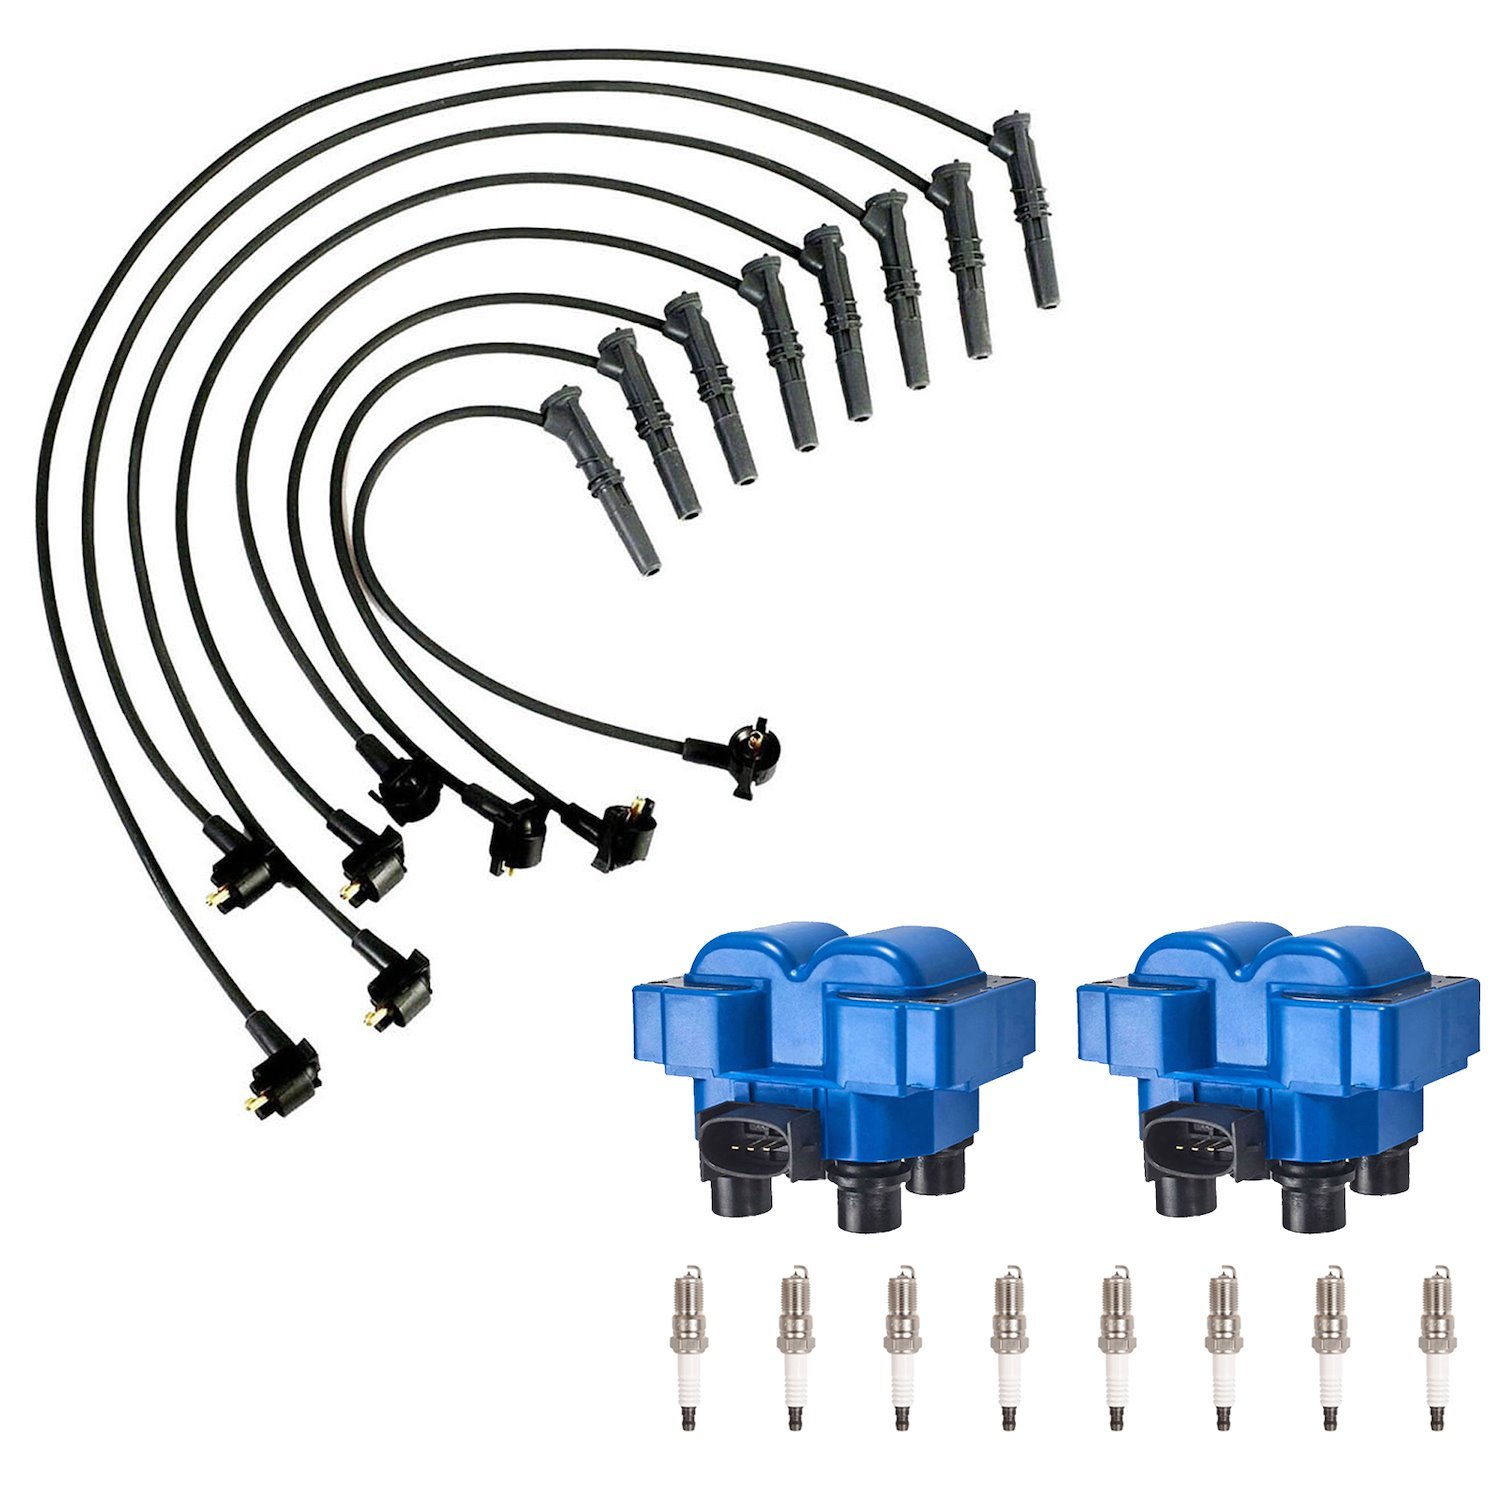 High-Performance Ignition Coil, Spark Plug, and Spark Plug Wire Kit for Ford F-150/F-250, Lincoln Mercury